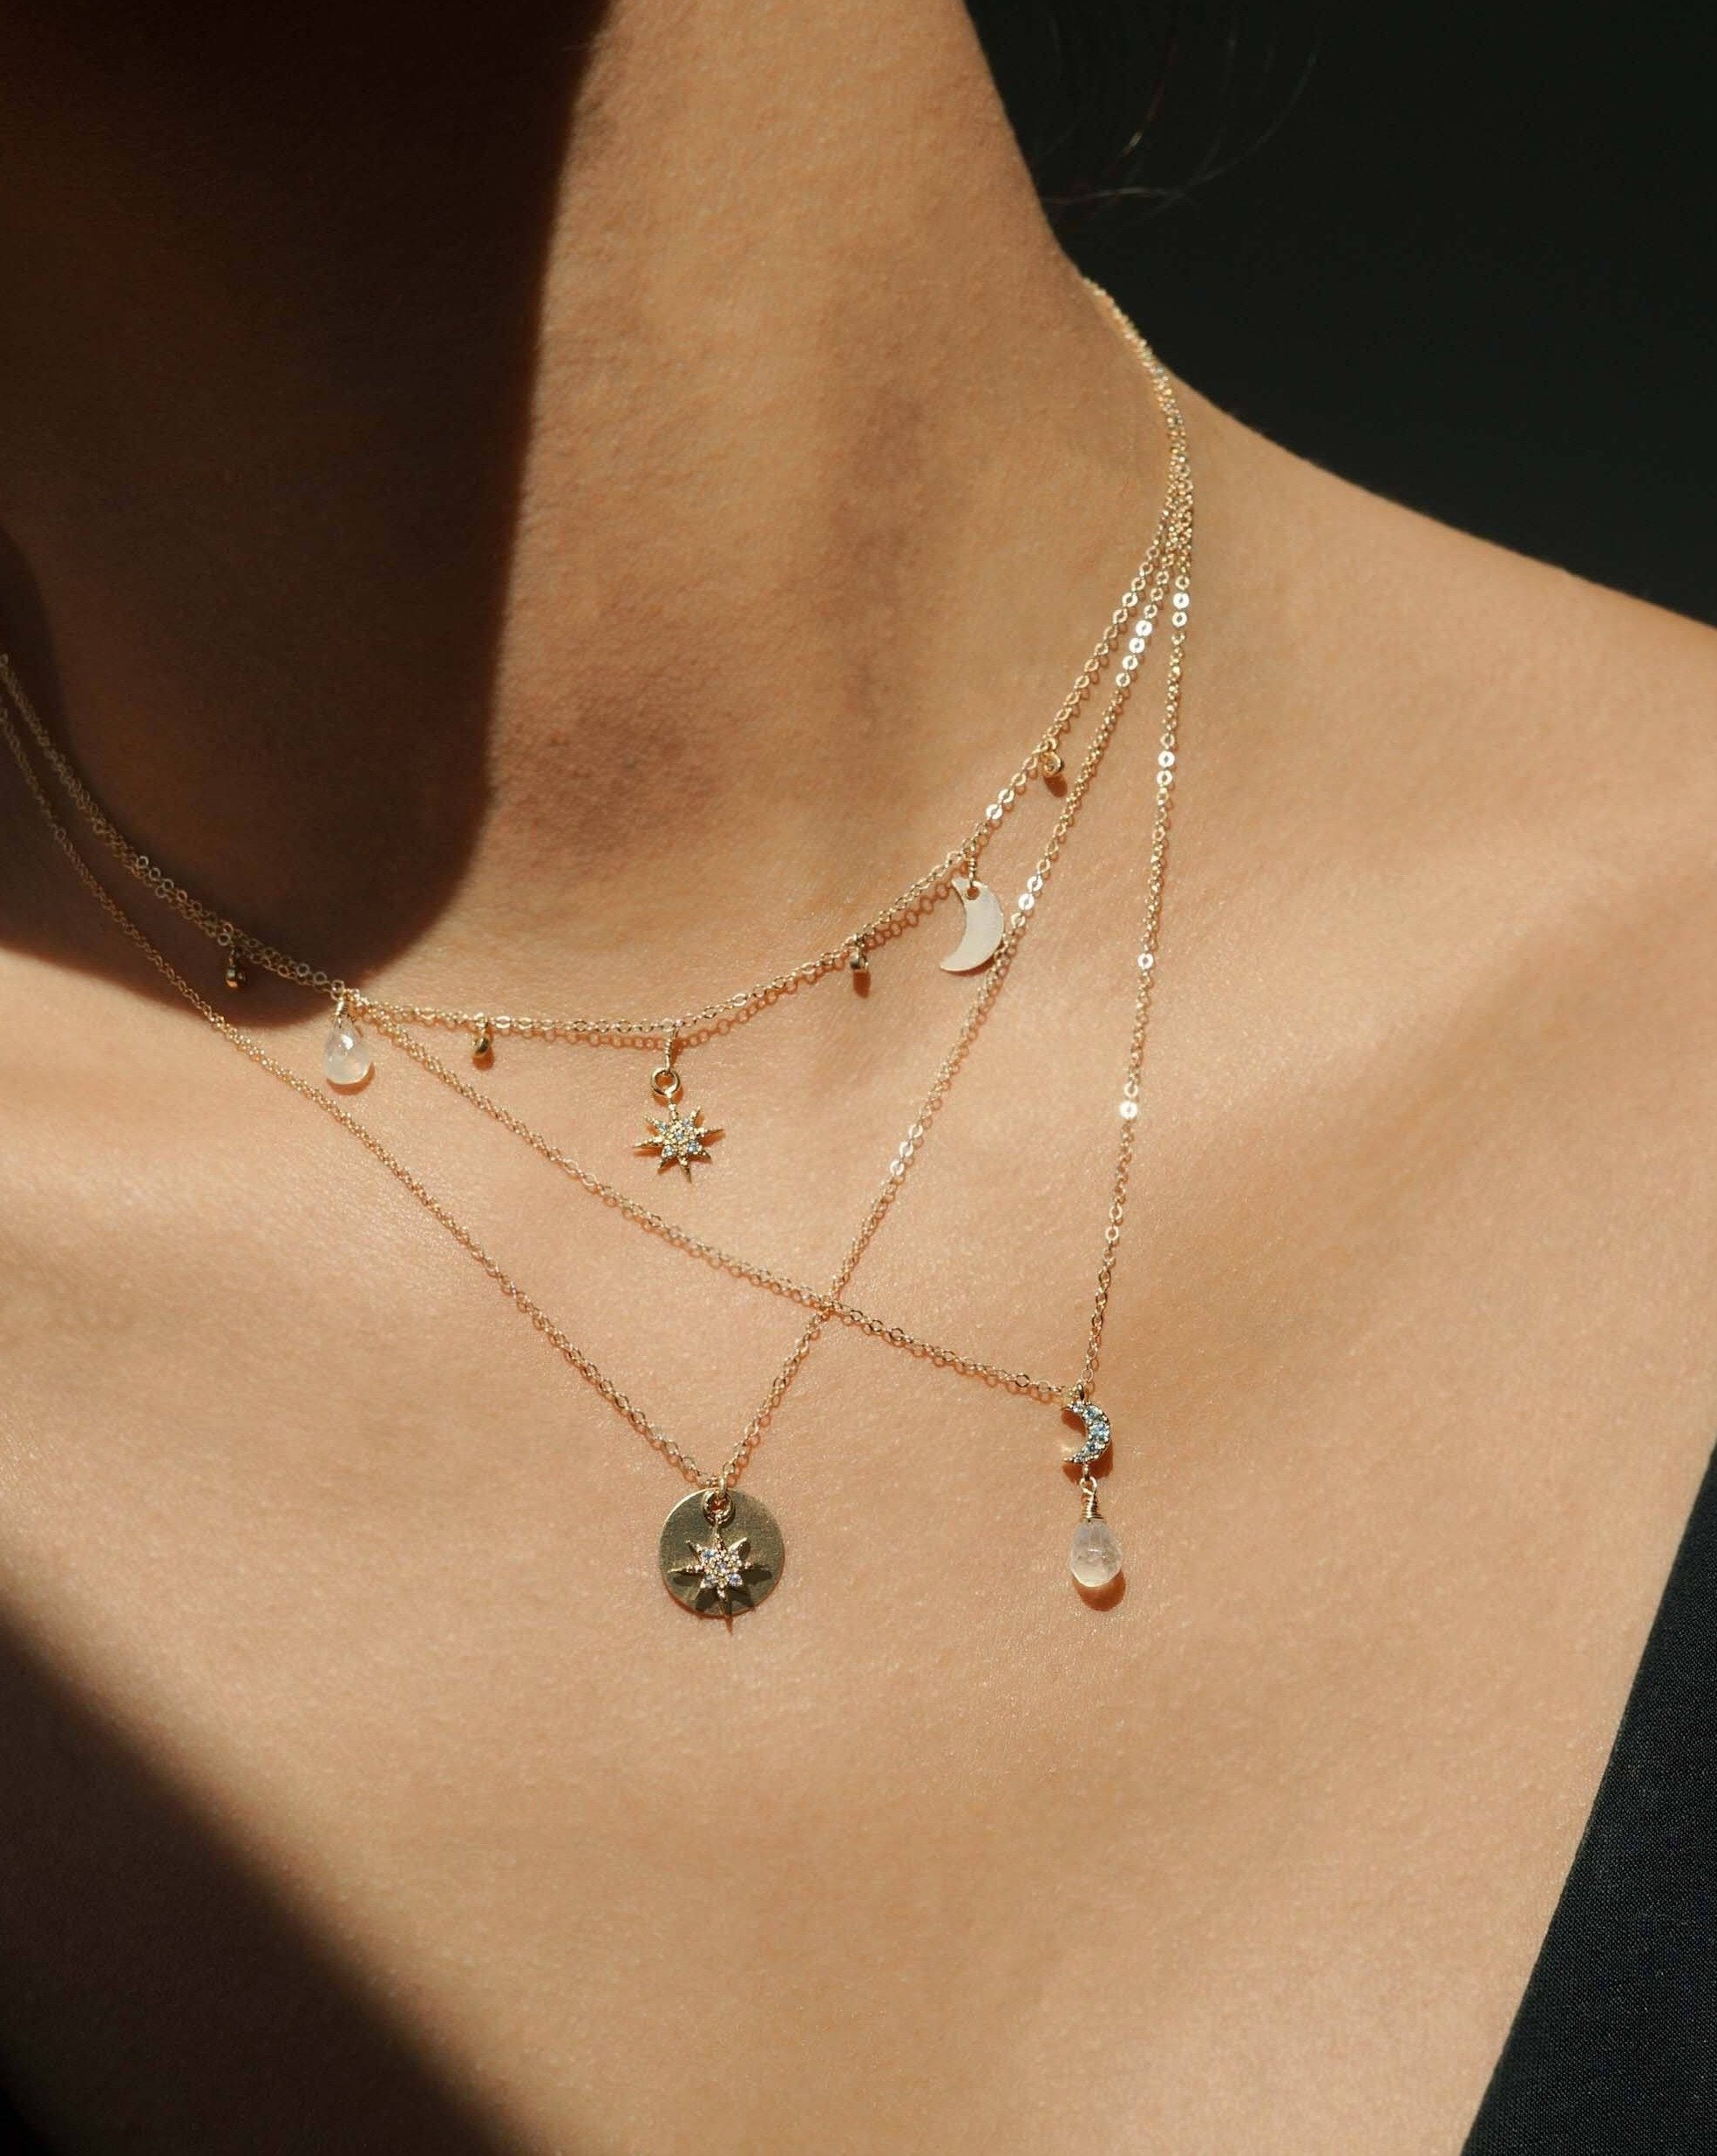 Caelum Necklace by KOZAKH. A 16 to 18 inch adjustable length necklace in 14K Gold Filled, featuring a faceted Moonstone droplet and a Cubic Zirconia encrusted moon charm.